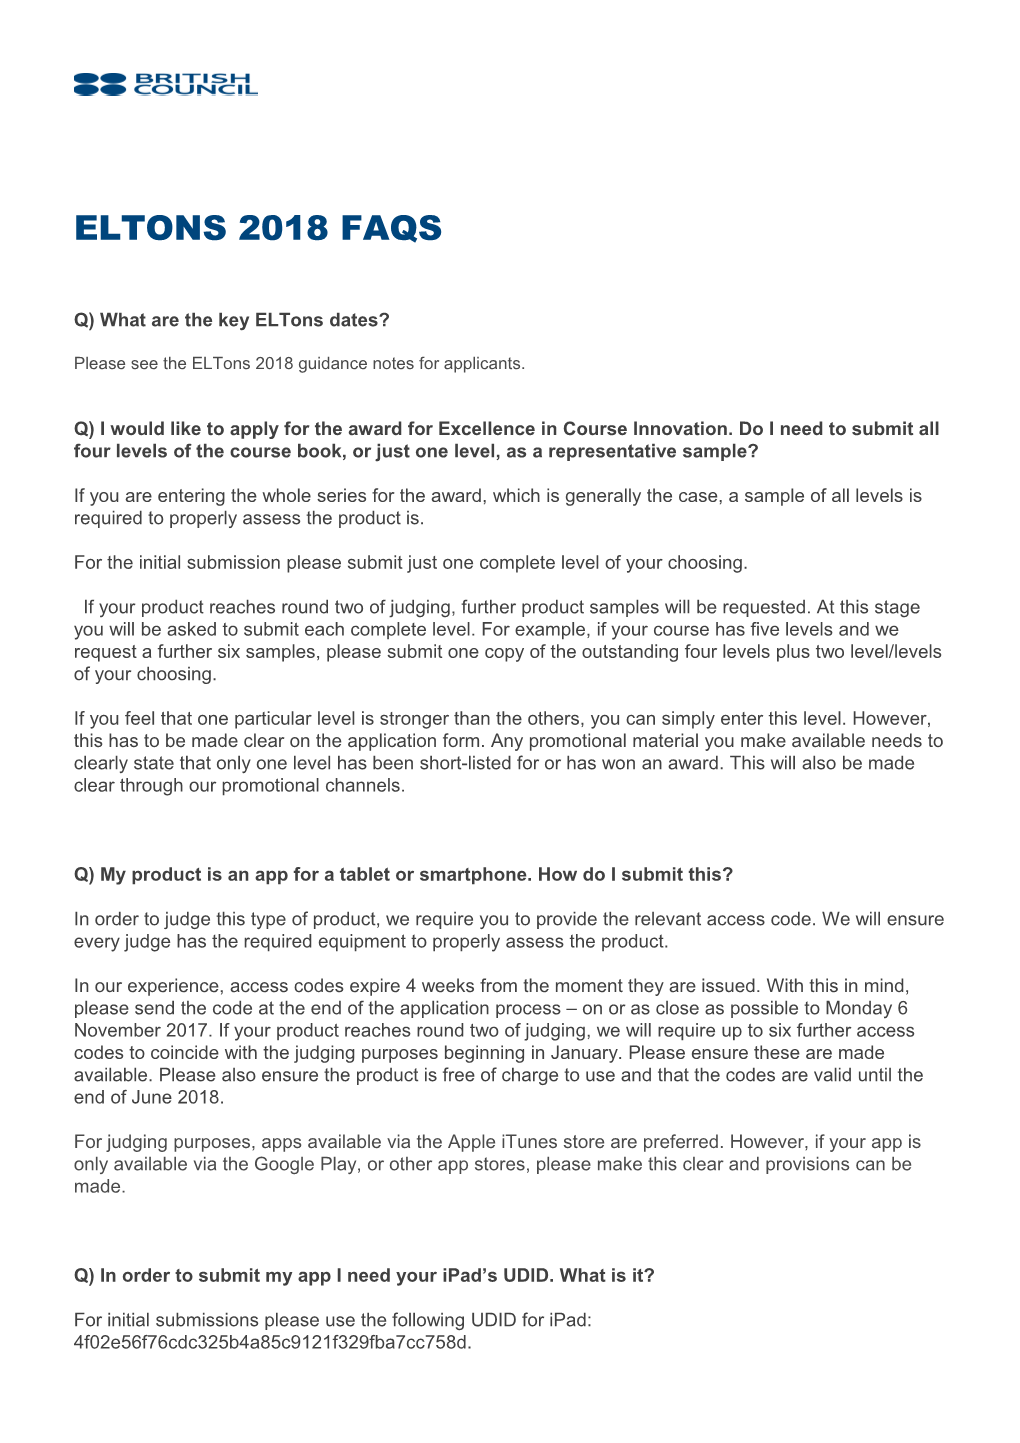 Q) What Are the Key Eltons Dates?